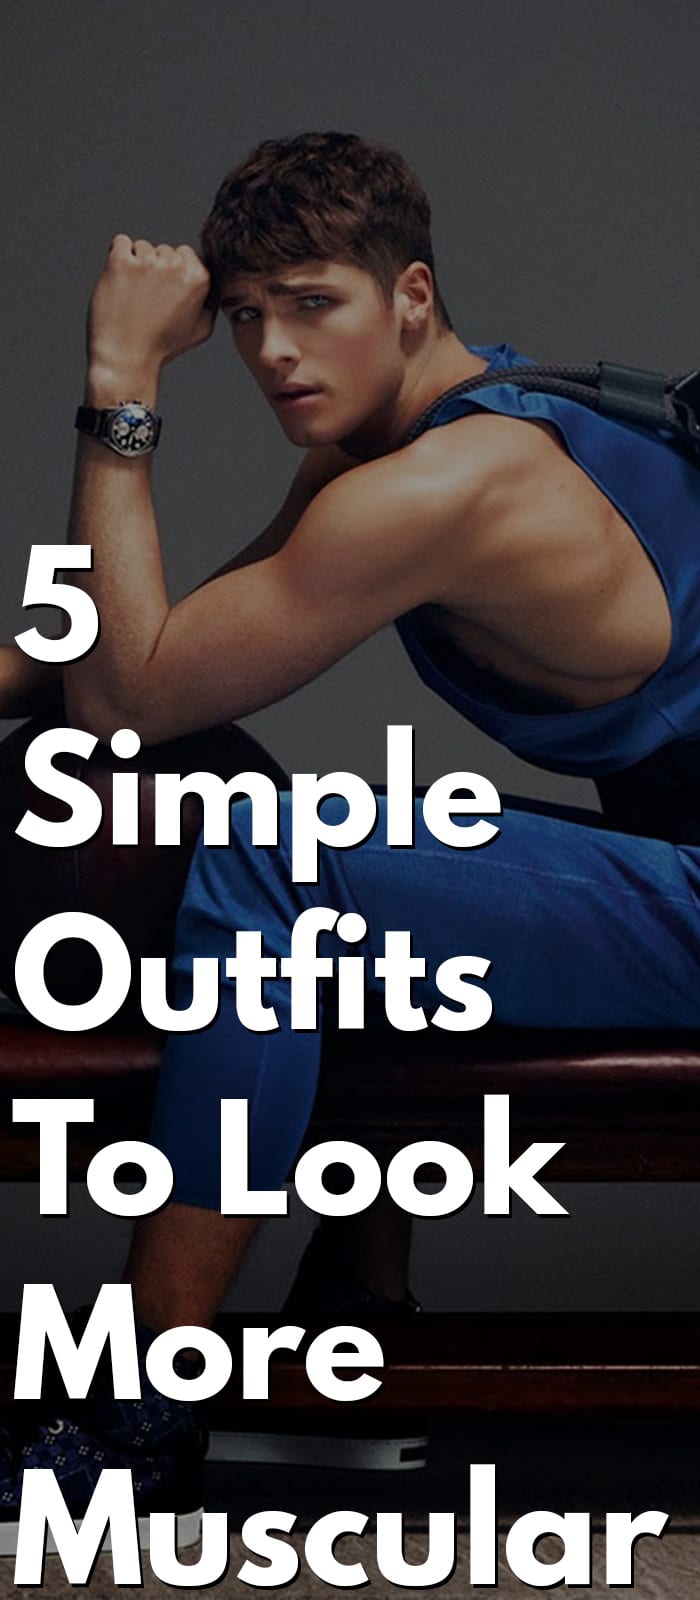 Simple Outfits To Look More Muscular